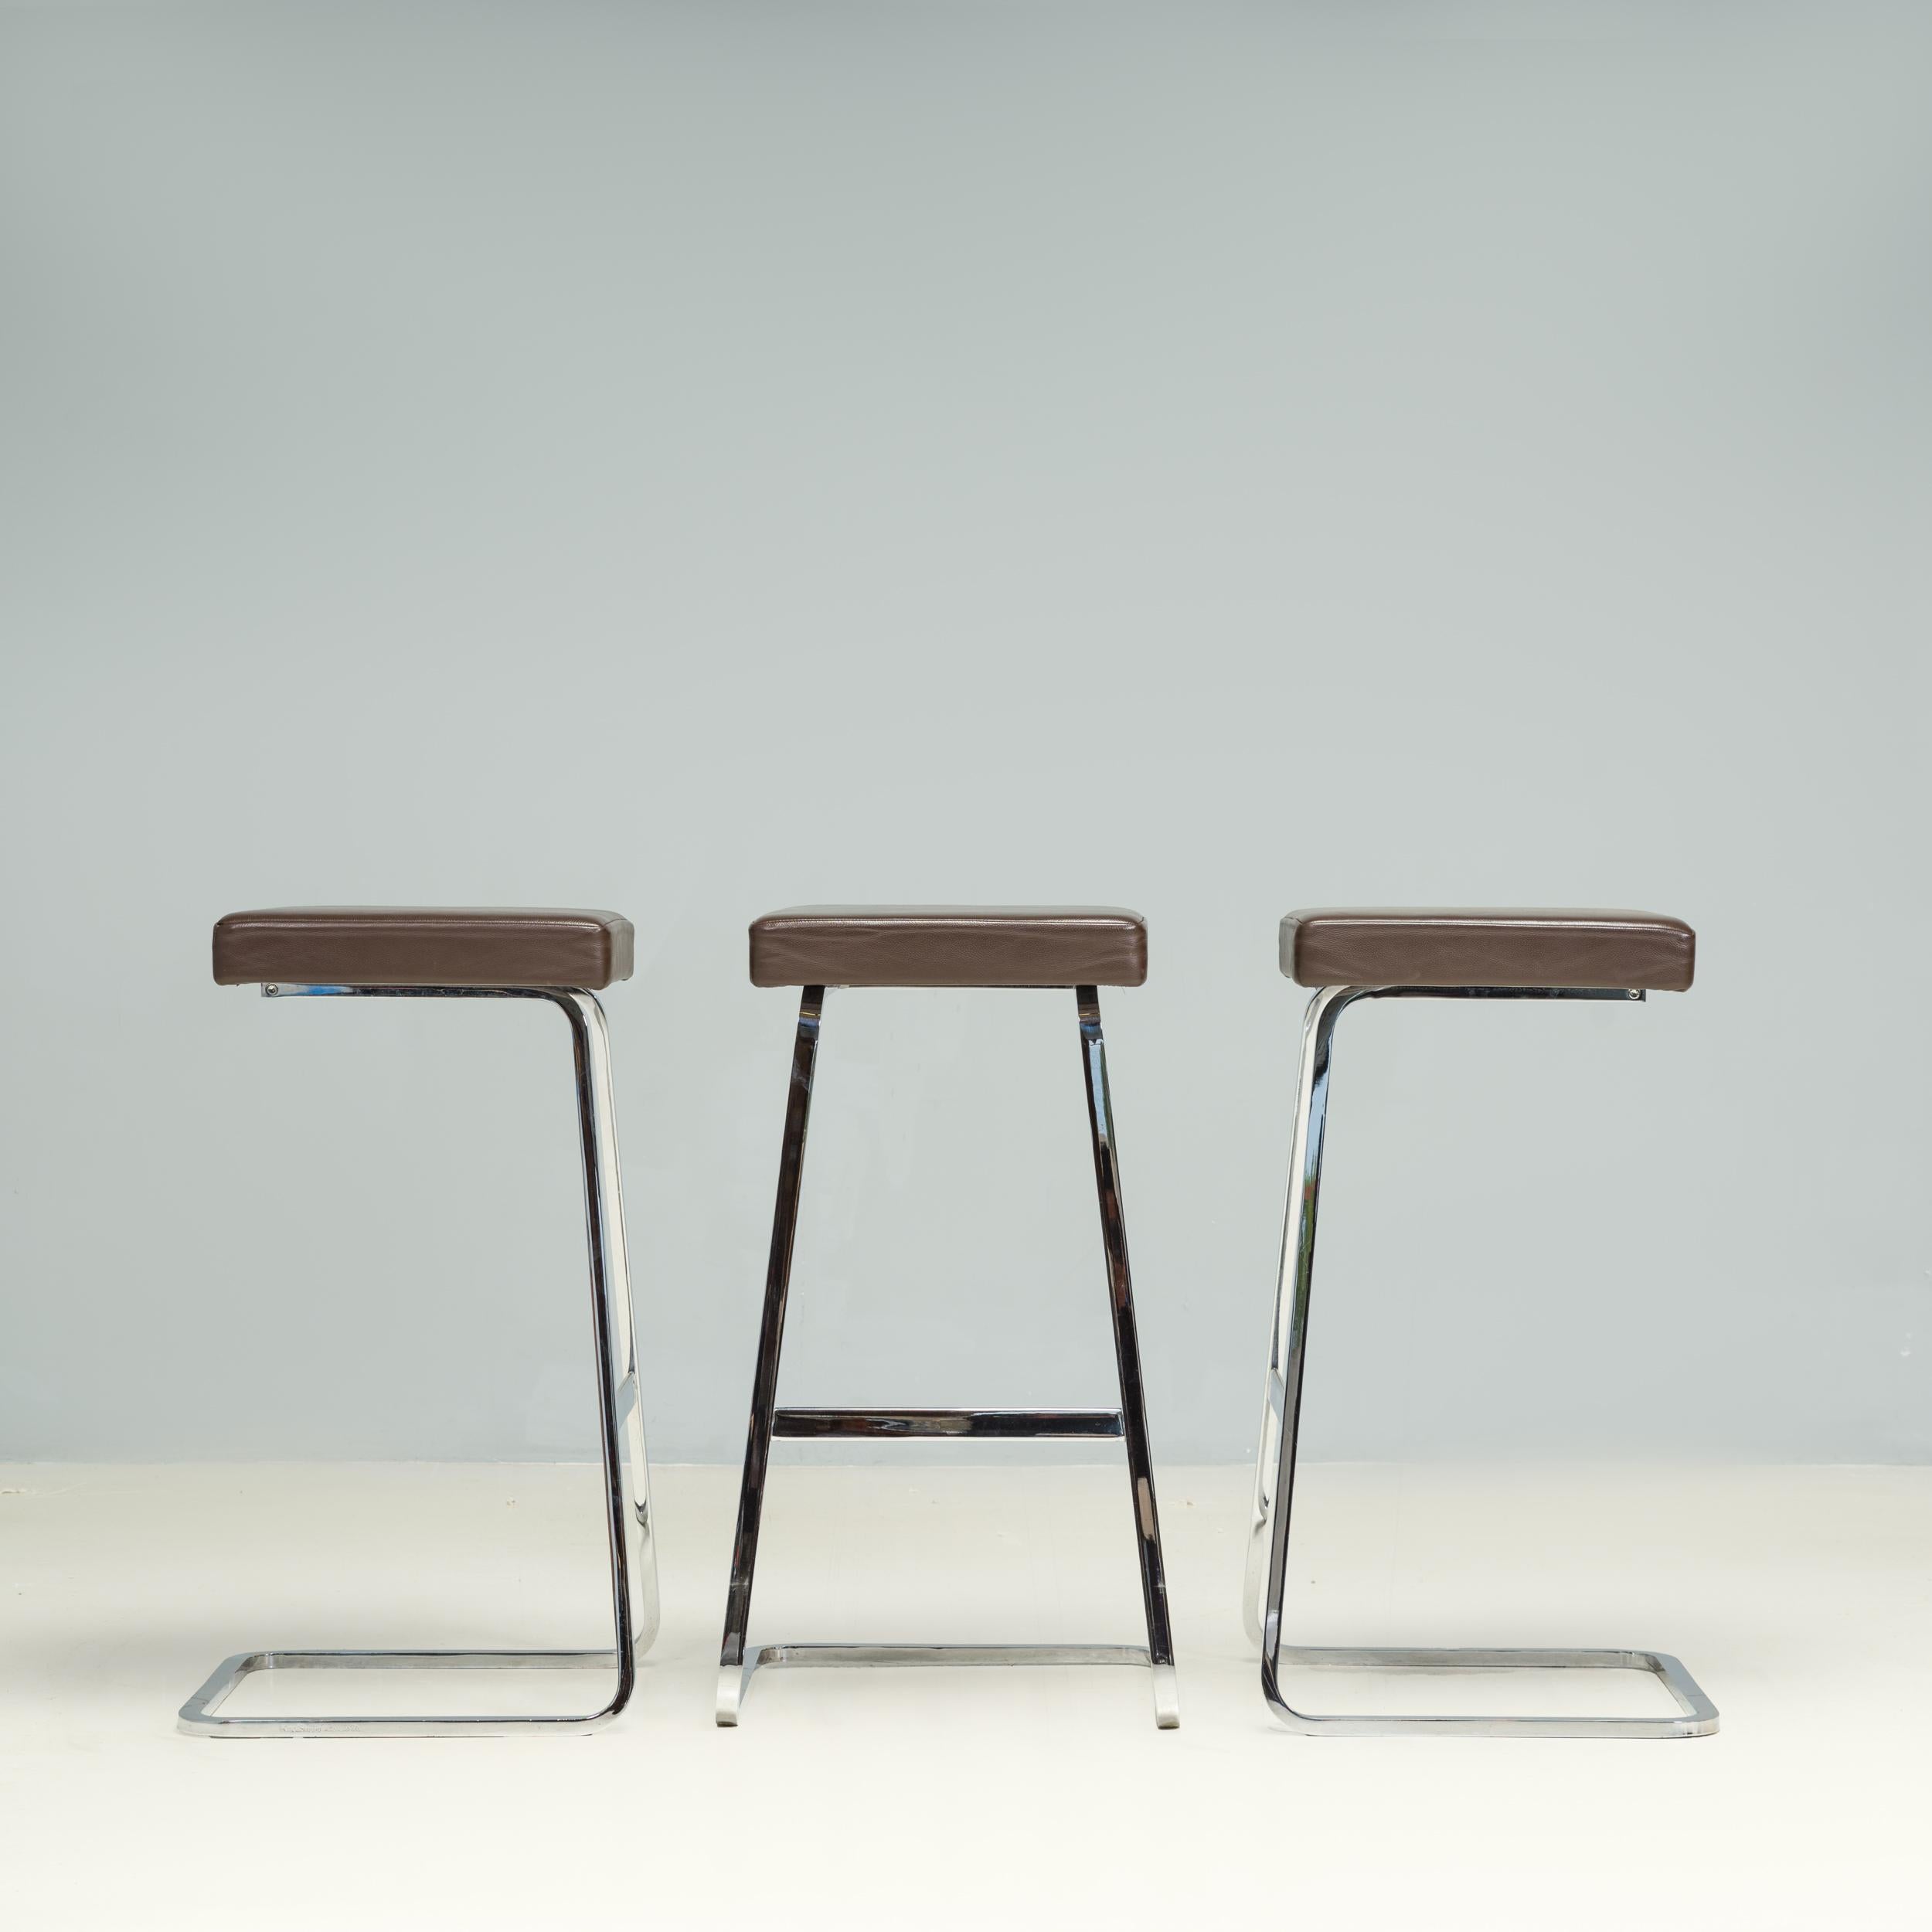 Originally designed by Ludwig Mies Van der Rohe in 1958 for the Four Seasons Restaurant at the Seagram Building in New York, the Four Seasons stool has been produced by Knoll since 2006.

Mies van der Rohe was the architect for the Seagram Building